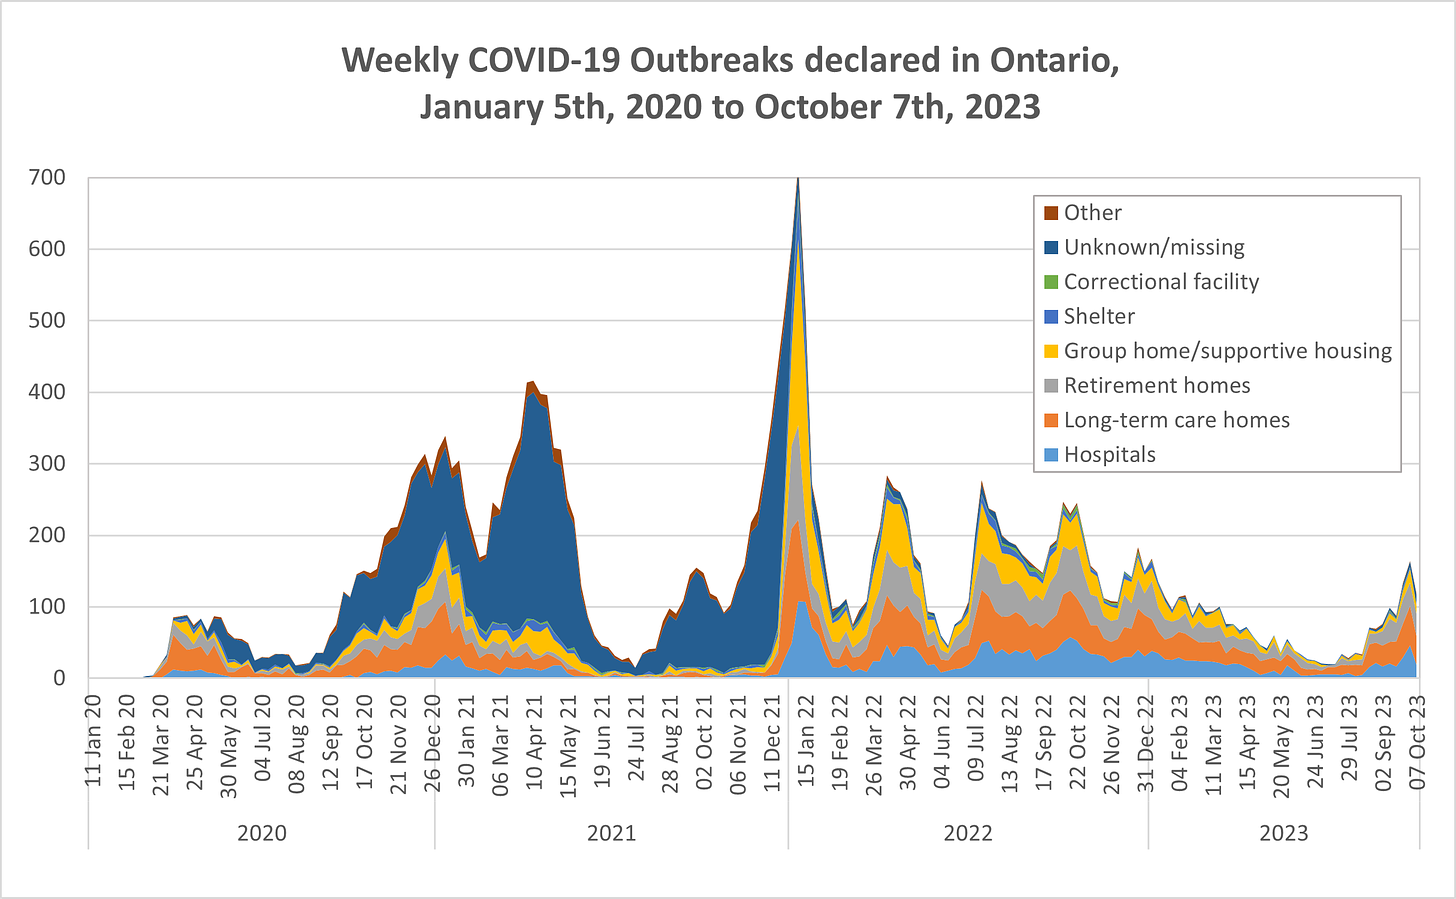 Stacked area chart showing weekly COVID-19 outbreaks declared in Ontario from January 5th, 2020 to October 7th, 2023, by setting (hospitals, long-term care homes, retirement homes, group home/ supportive housing, shelters, correctional facilities, unknown/missing, and other). Total outbreaks peak around 100 in April 2020, 300 in November 202, 400 in March 2021, 700 in January 2022, 250 in March 2022, July 2022 and September 2022, and increasing from around 20 in July 2023 to 150 by late September 2023, dropping to around 120 by October 2023.